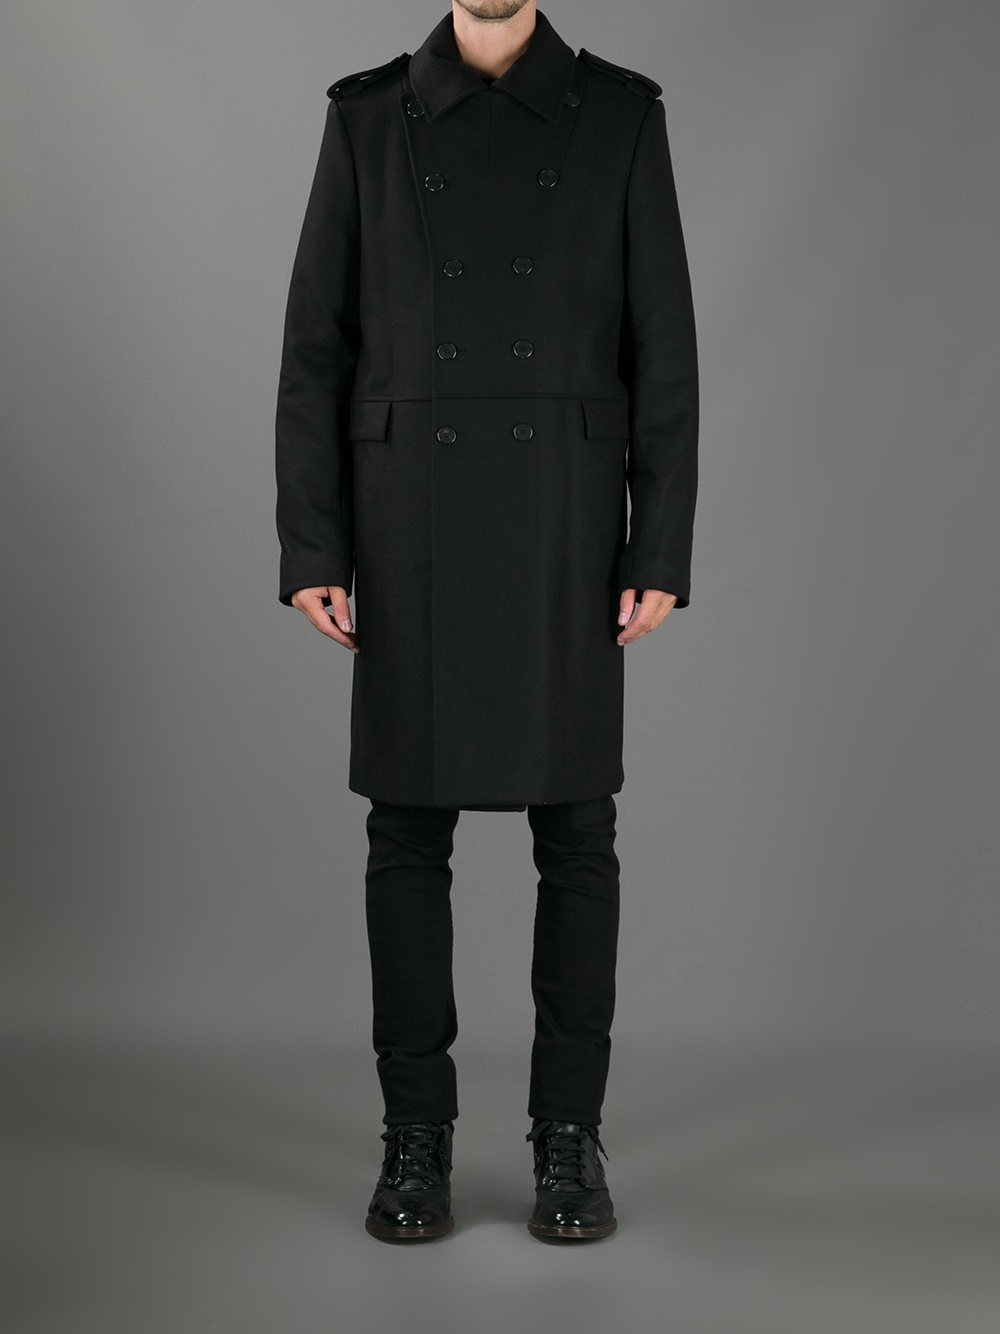 Givenchy Wool Trench Coat in Black for Men - Lyst